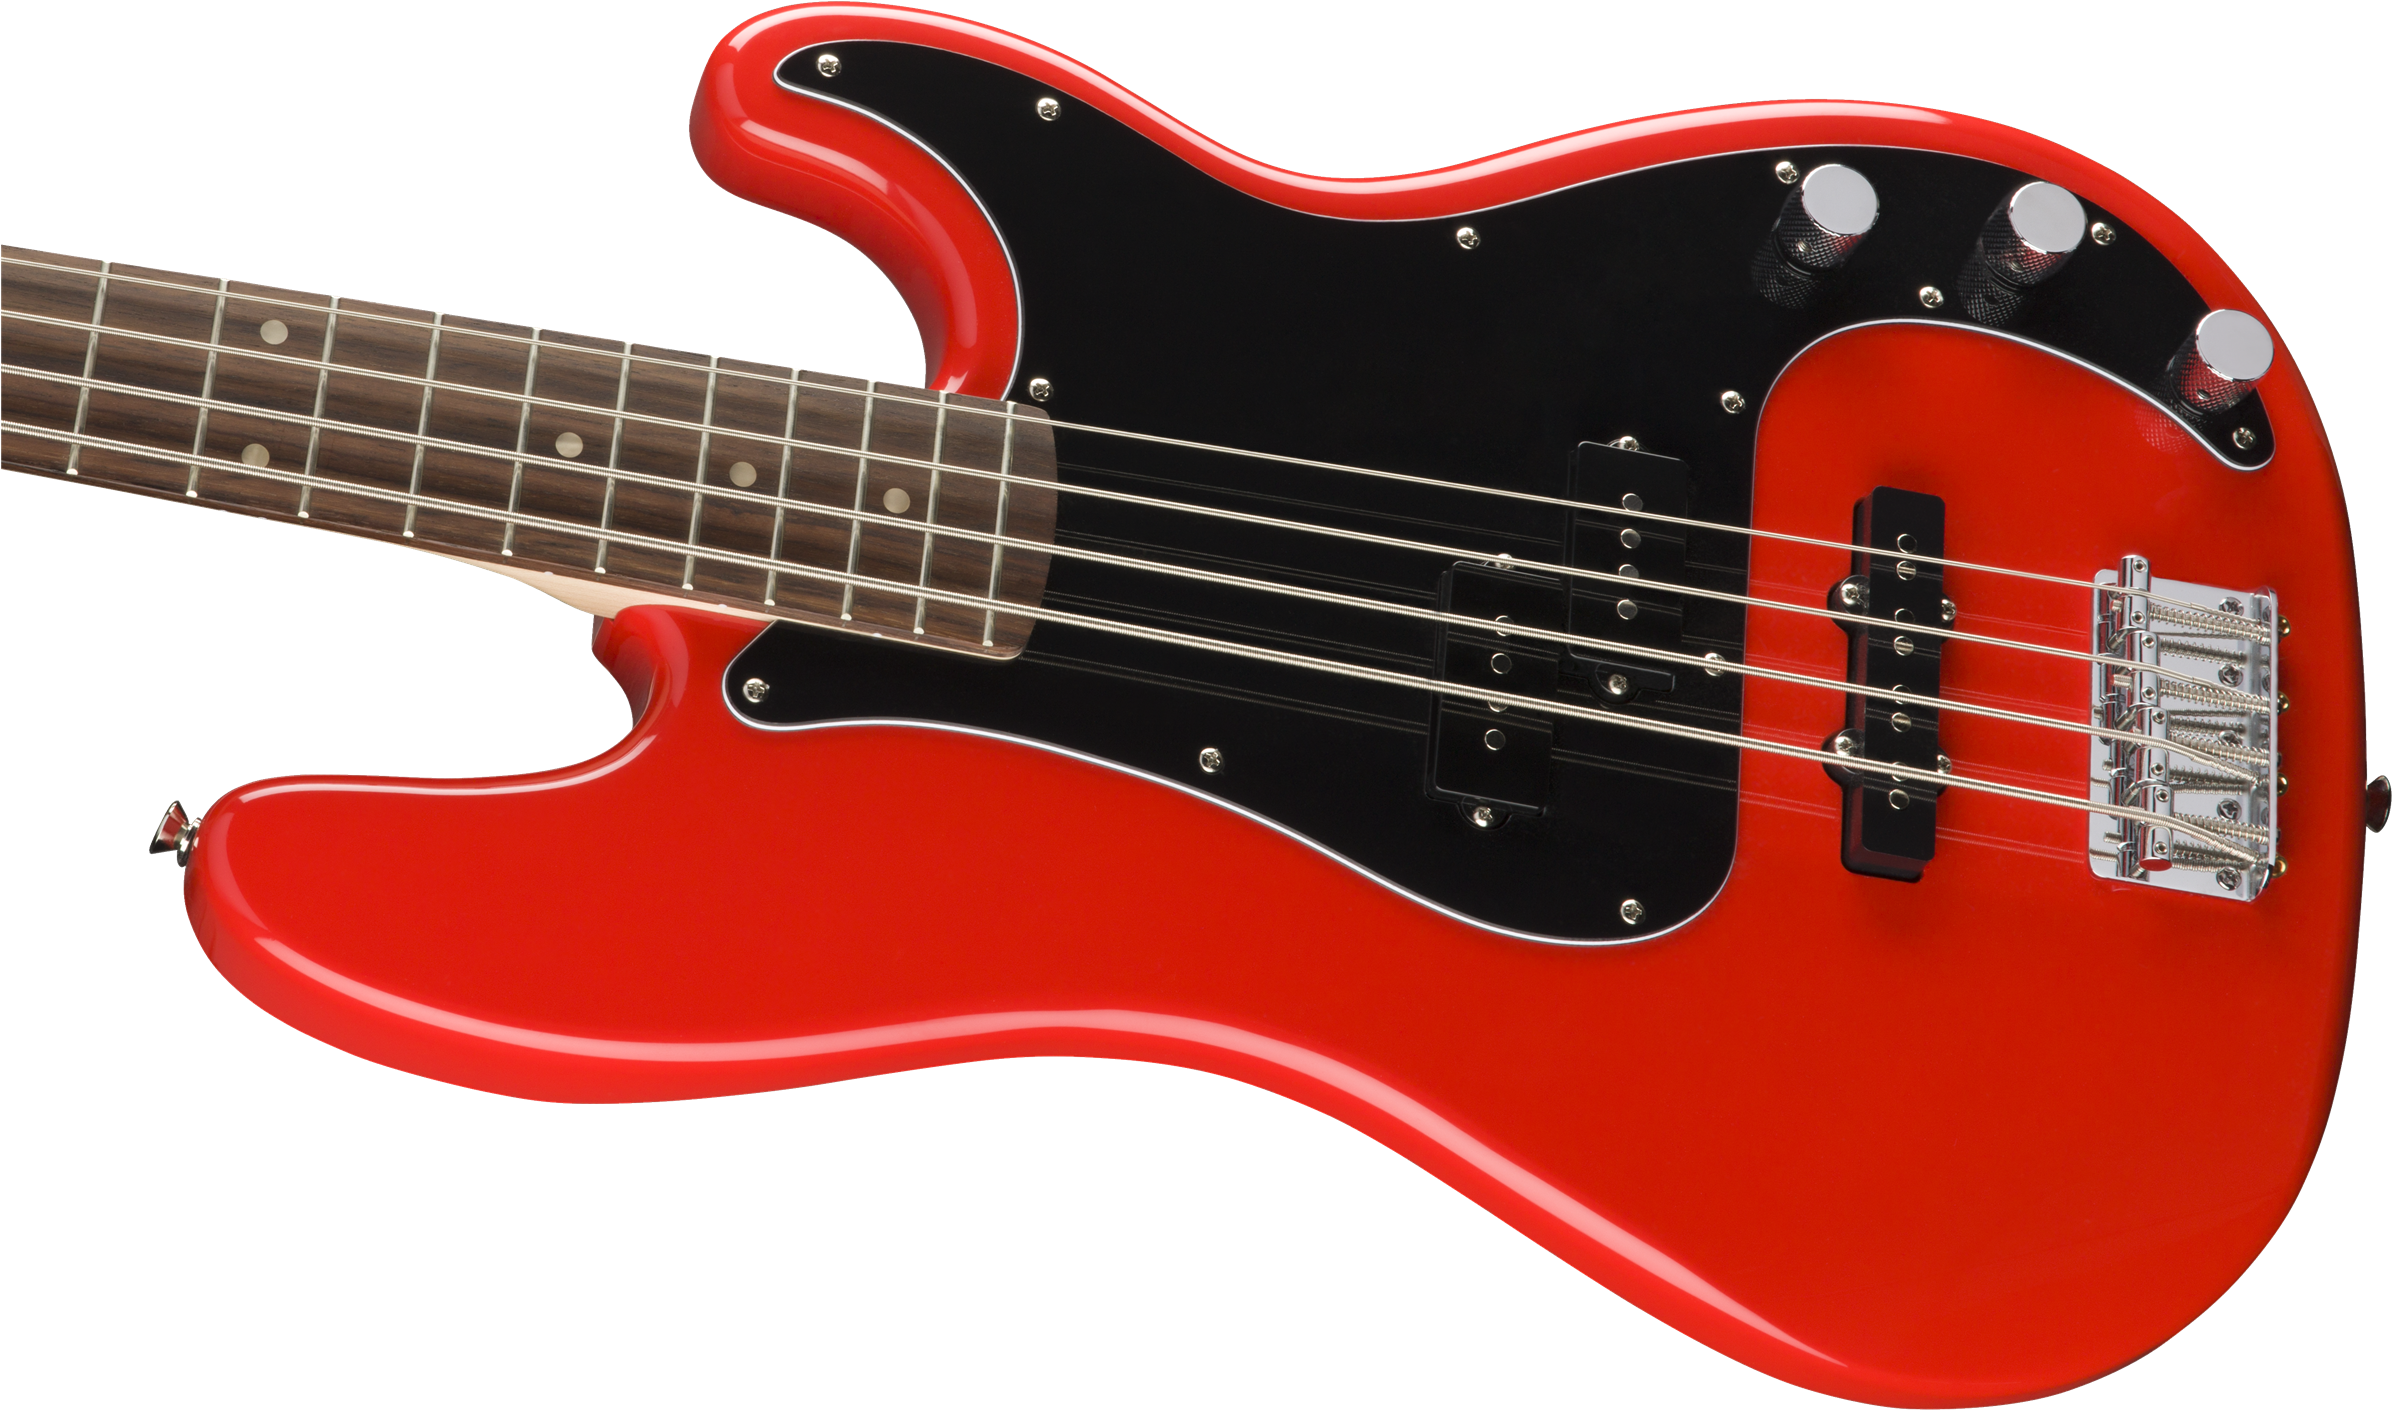 Squier Precision Bass Affinity Series Pj (lau) - Race Red - Solidbody E-bass - Variation 4